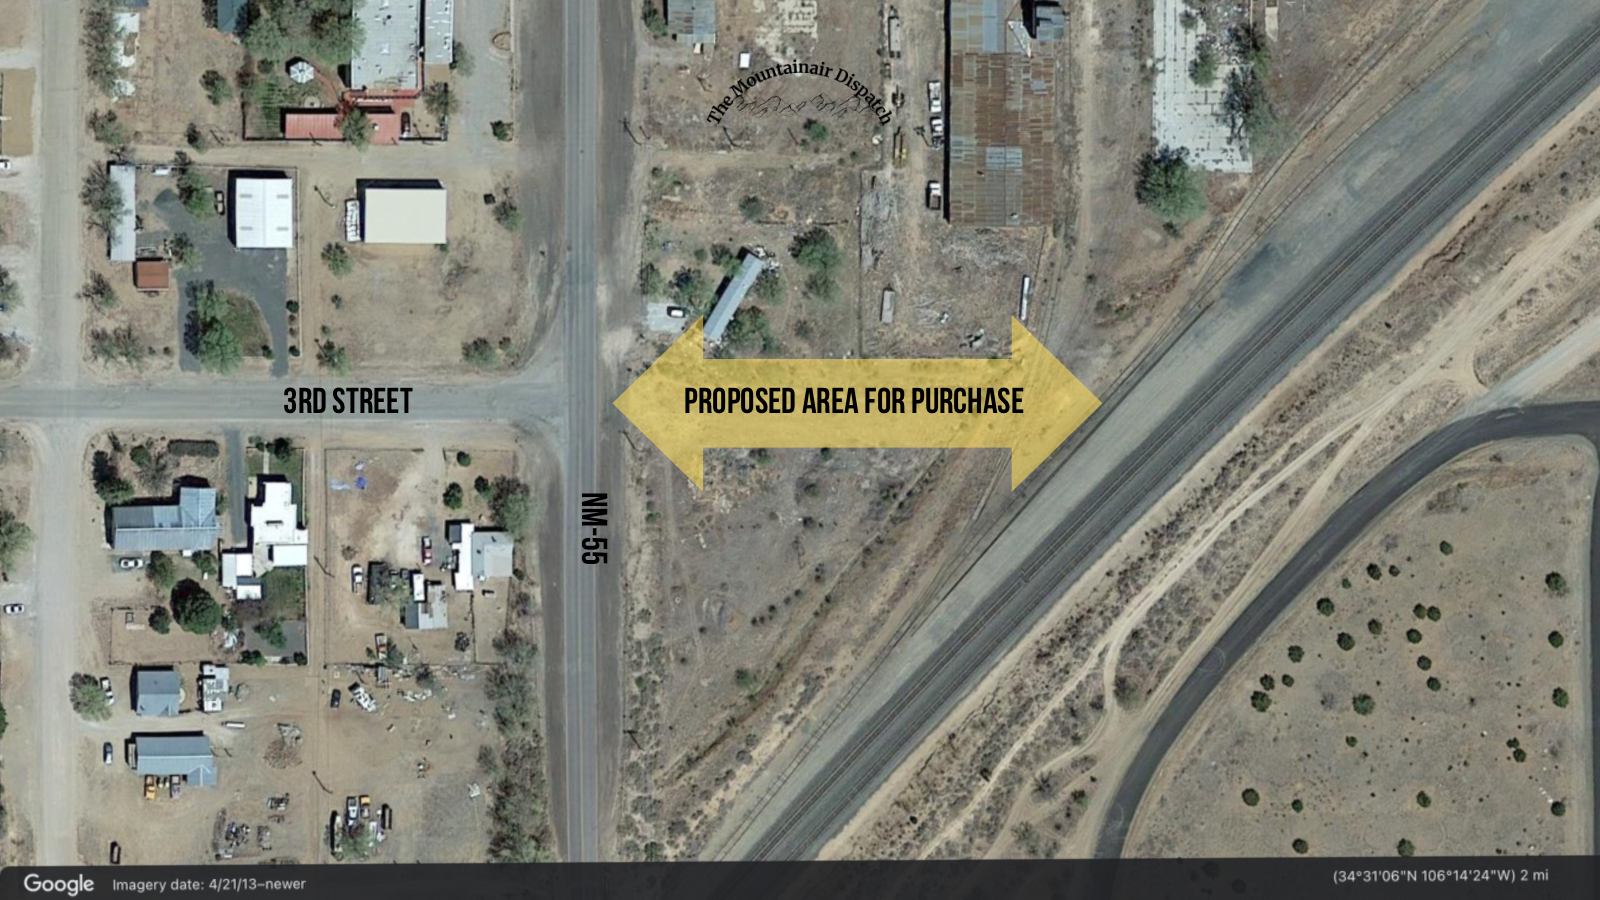 Satellite imagery depicting the part of 3rd Street being proposed for purchase.